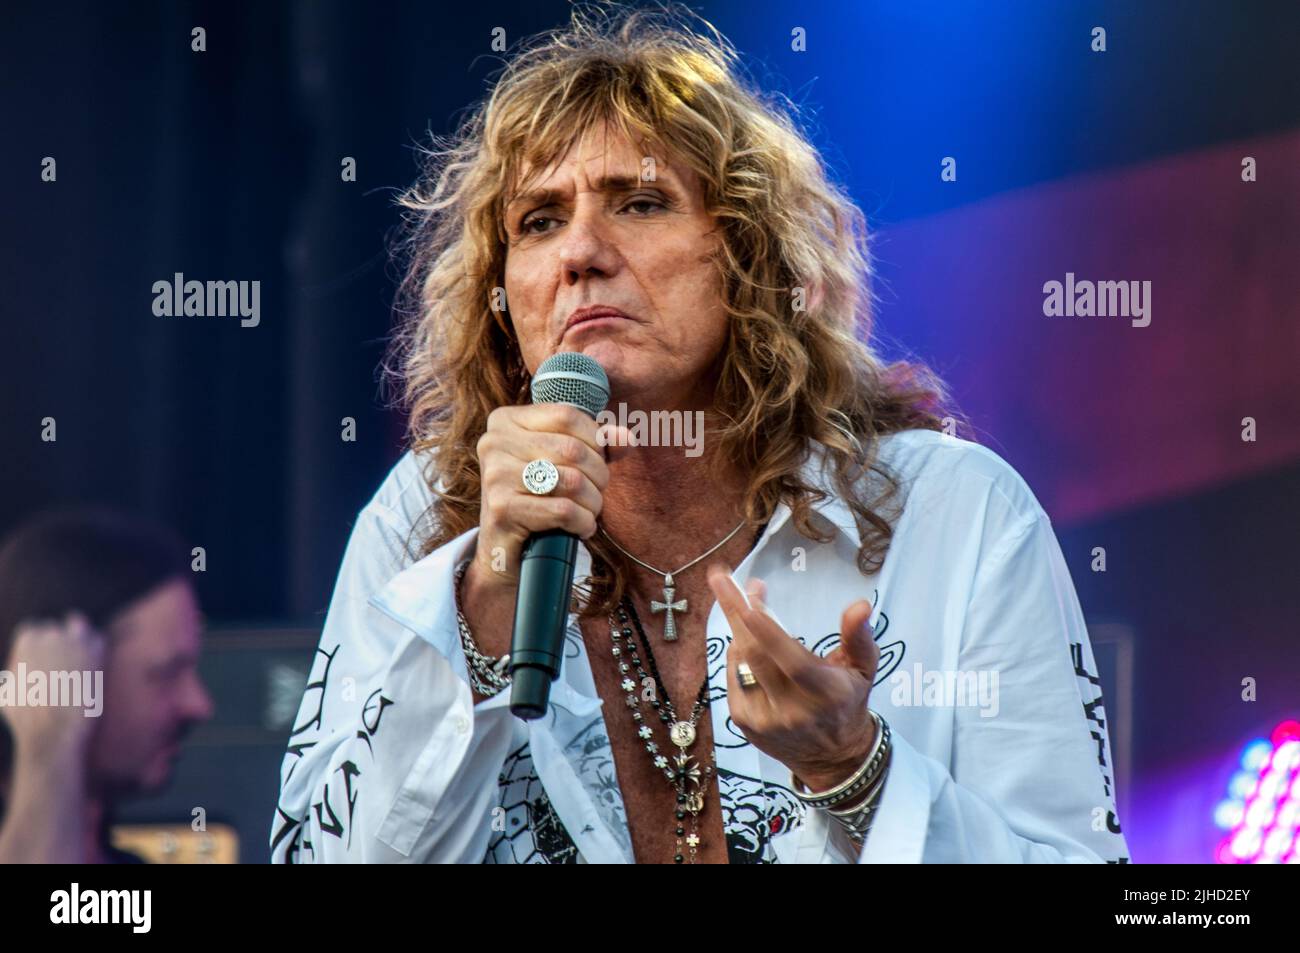 David Coverdale during a gig with his Whitesnake Stock Photo